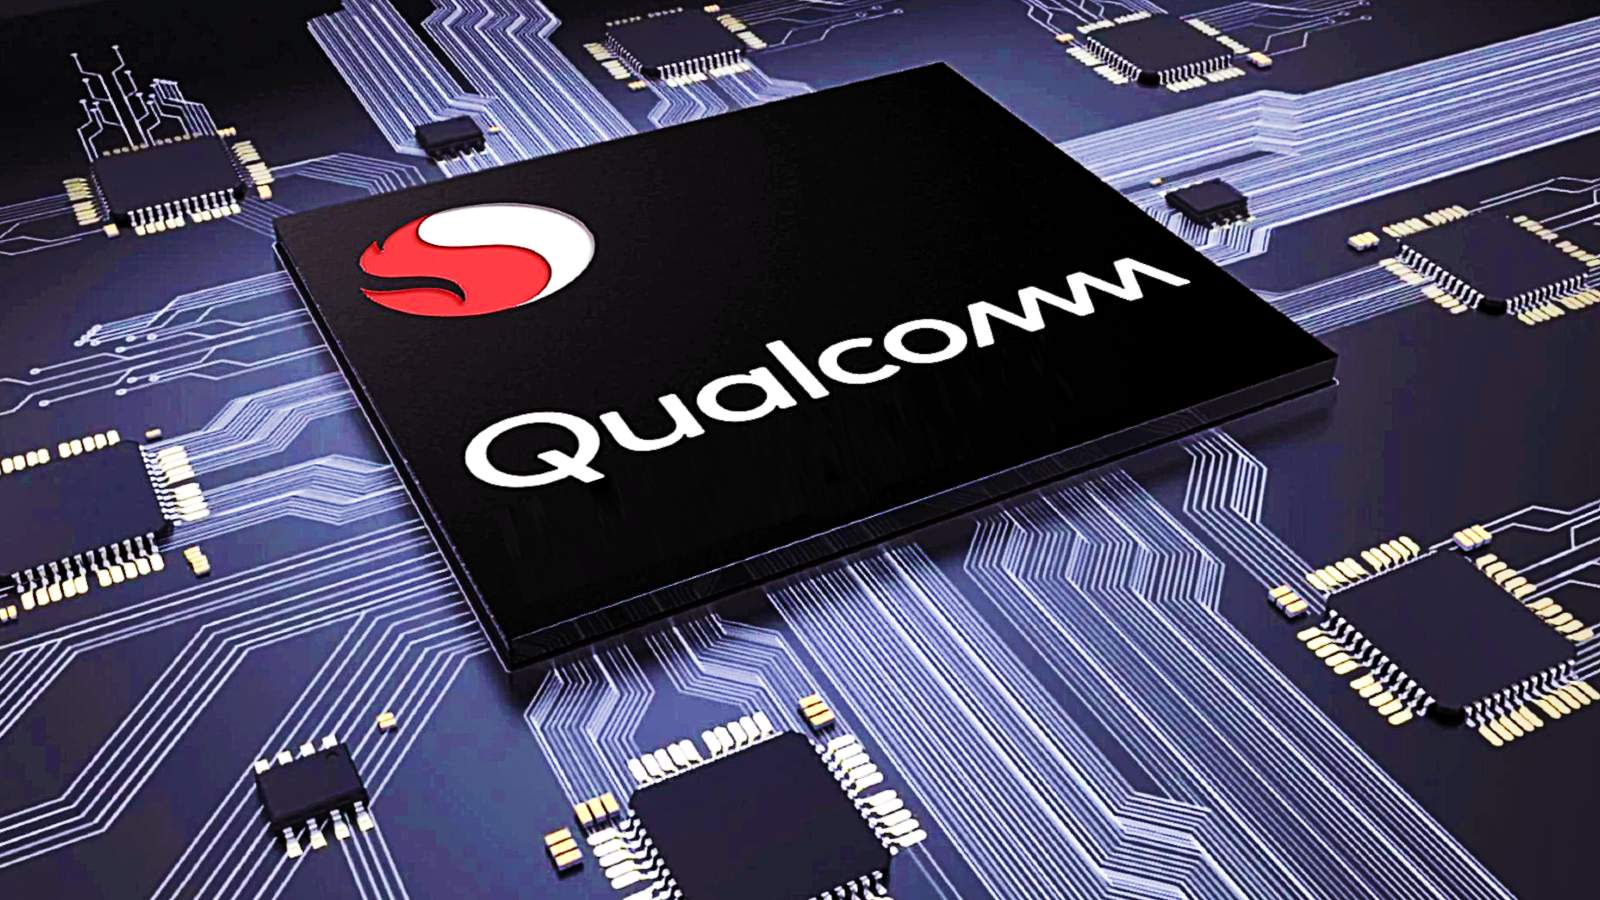 Qualcomm to Supply Apple with 5G Chips Until 2026 Under New Deal